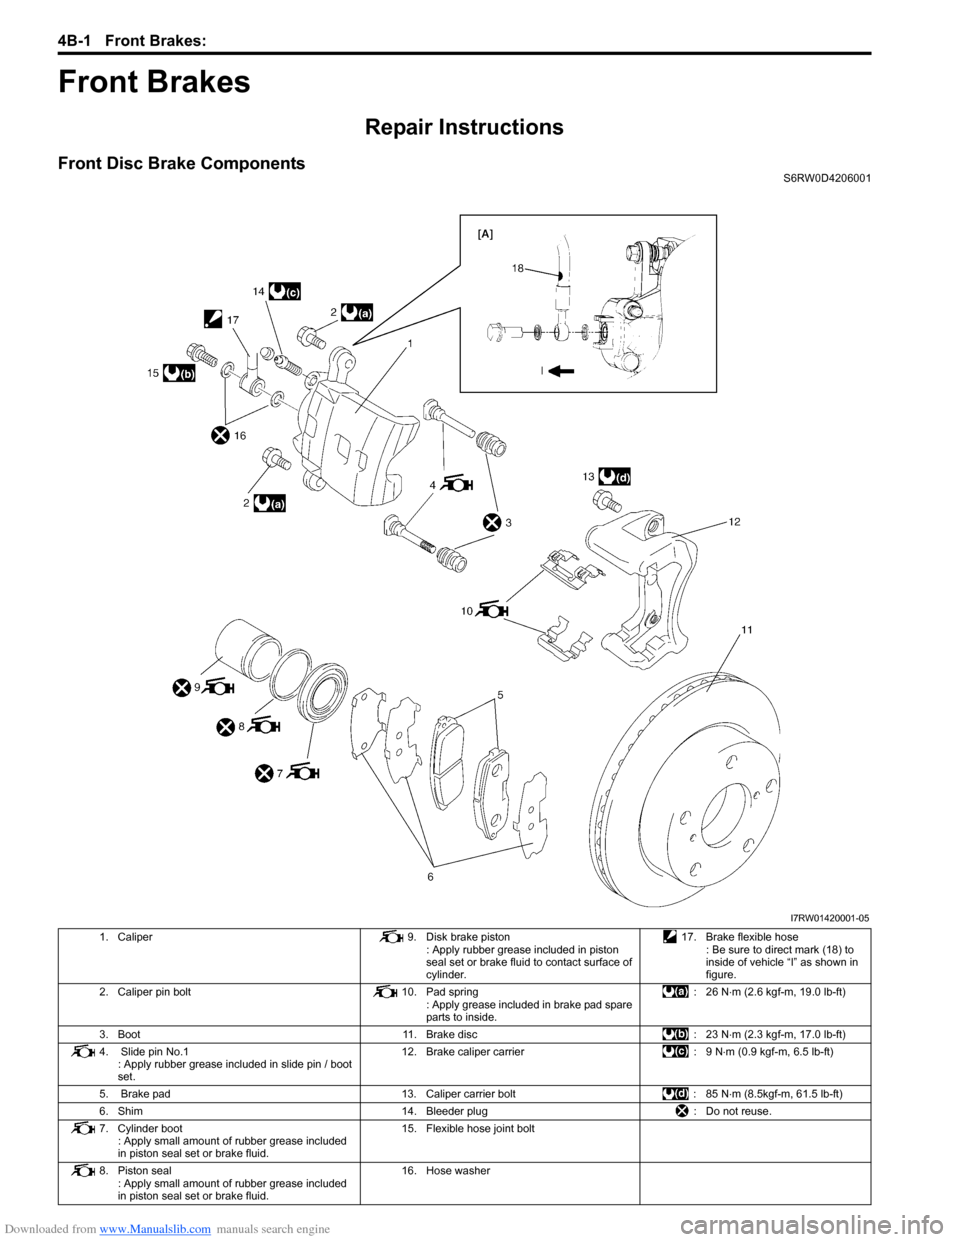 SUZUKI SX4 2006 1.G Service User Guide Downloaded from www.Manualslib.com manuals search engine 4B-1 Front Brakes: 
Brakes
Front Brakes
Repair Instructions
Front Disc Brake ComponentsS6RW0D4206001
I7RW01420001-05
1. Caliper 9. Disk brake p